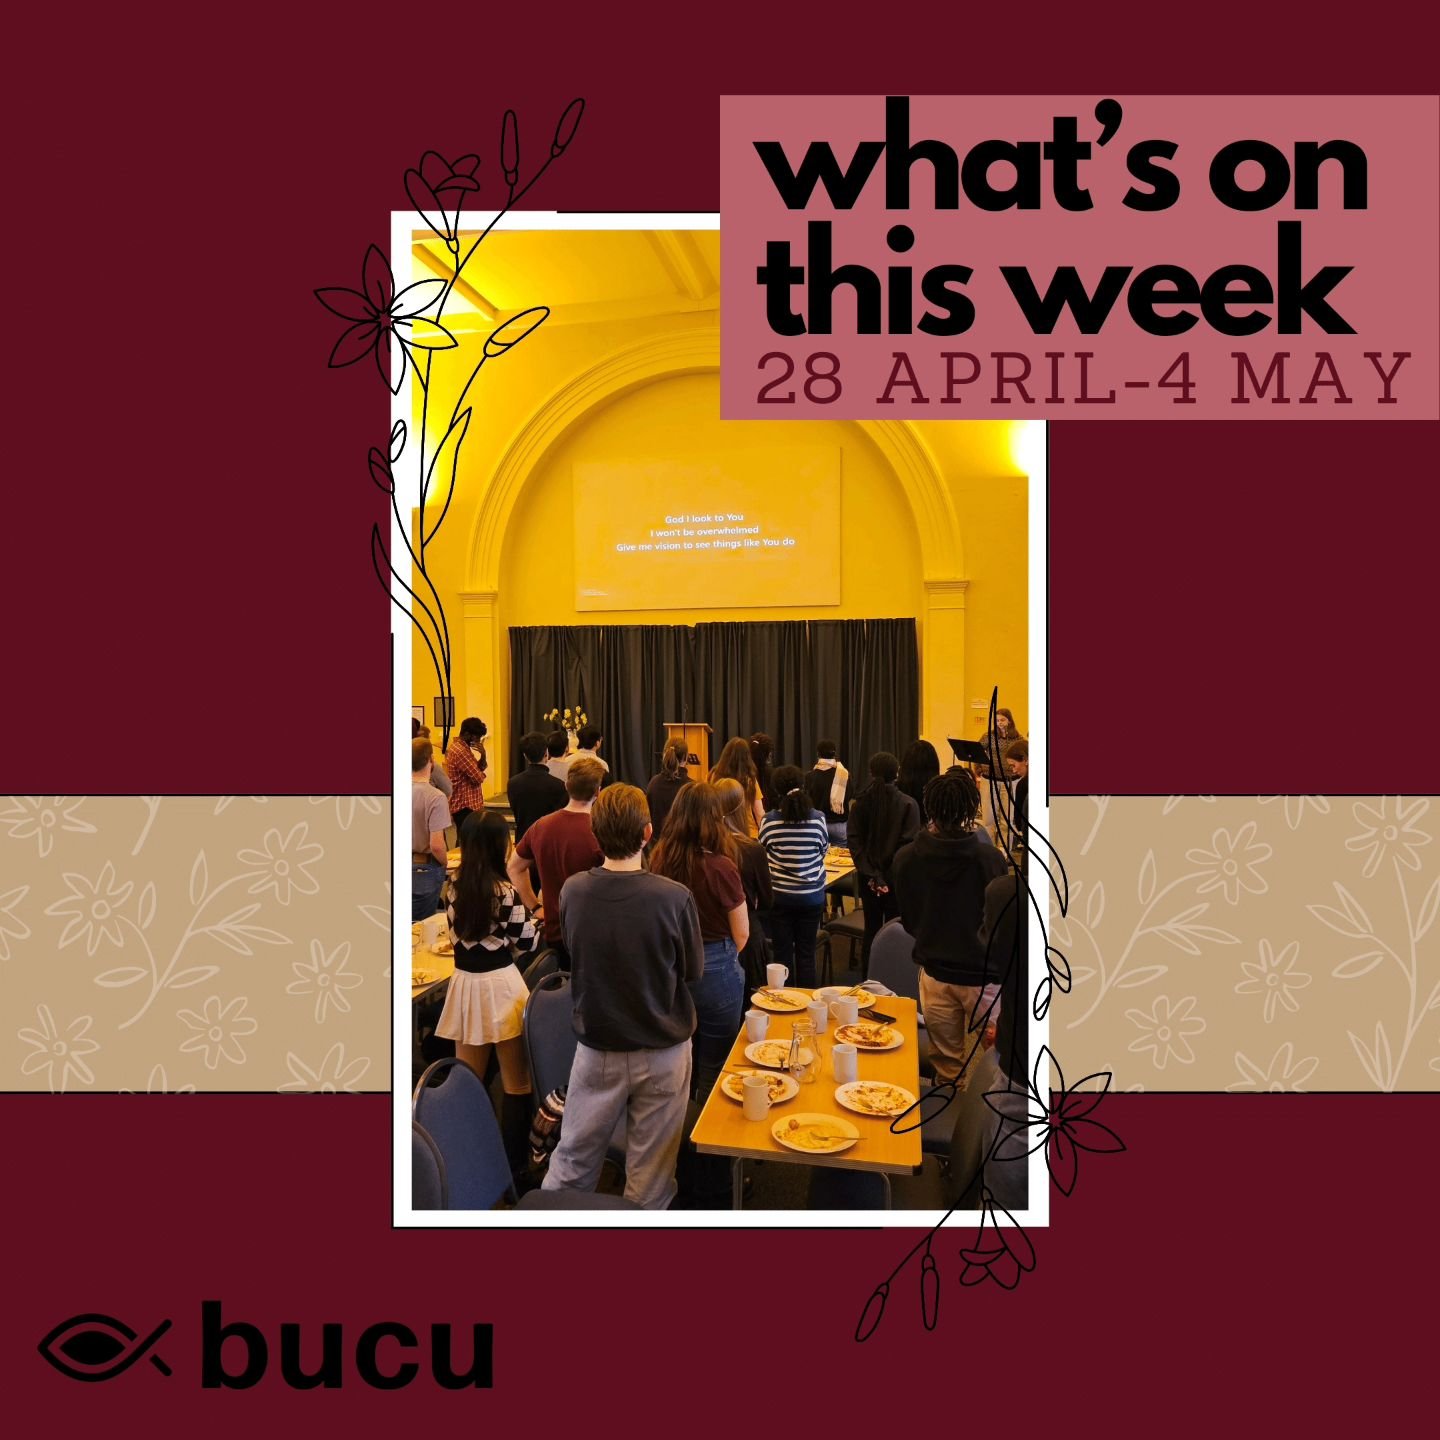 WEEK 24 // WHAT'S ON THIS WEEK // 

Hey everyone! Hope you had an amazing week last week! As we ease into exam season, how about dedicating some time to connect with God at BPM tomorrow? If early mornings aren&rsquo;t your thing, don&rsquo;t worry&md